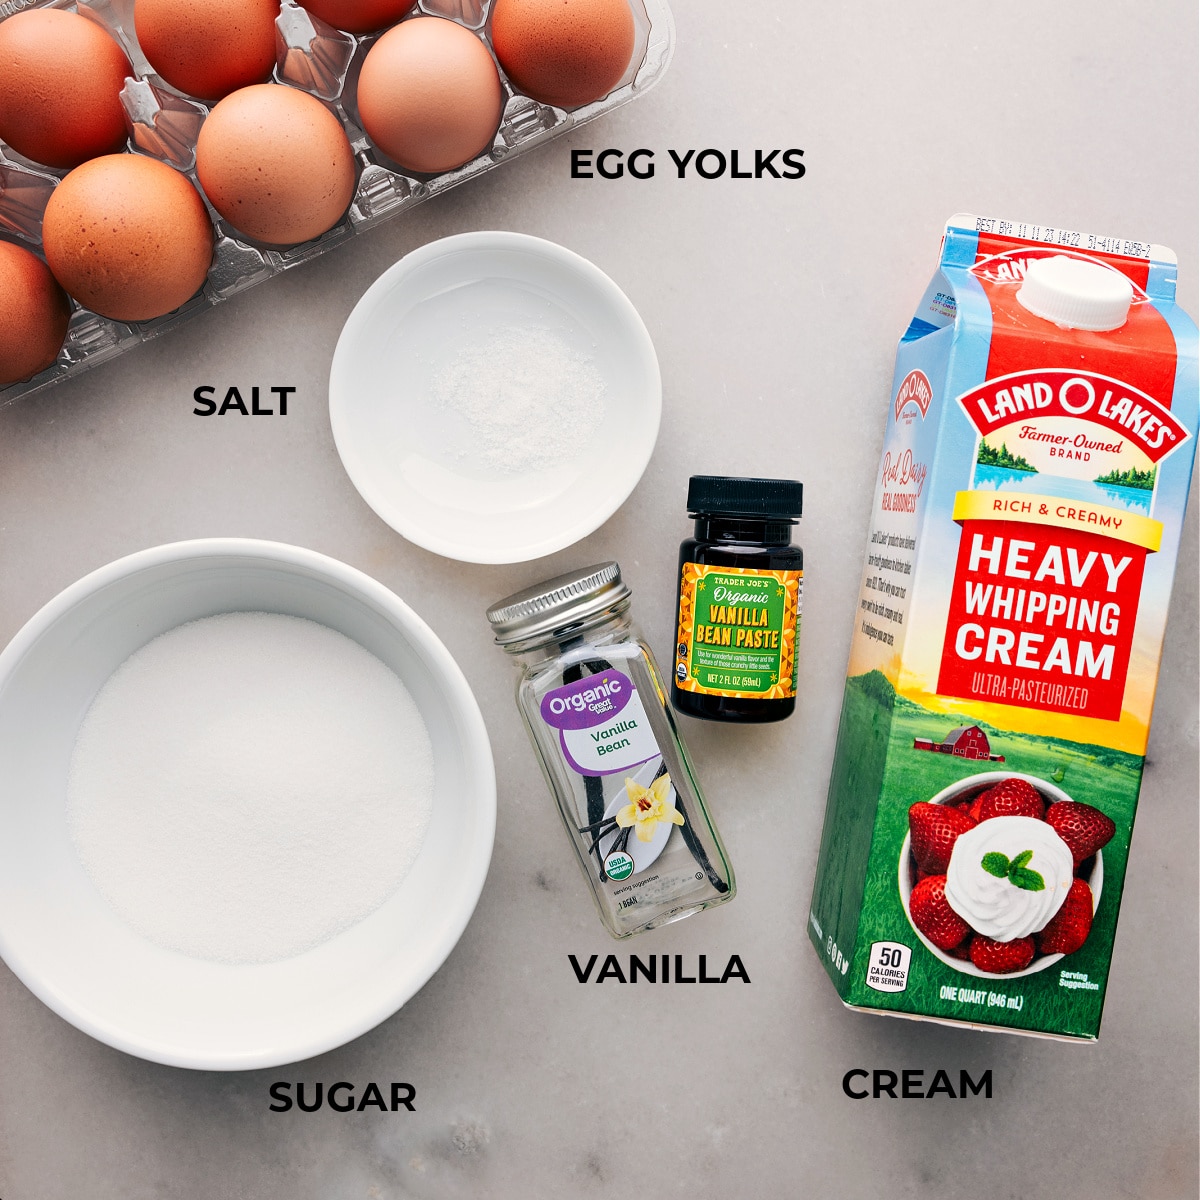 Ingredients spread out for making the creme brûlée recipe, including eggs, sugar, and cream.